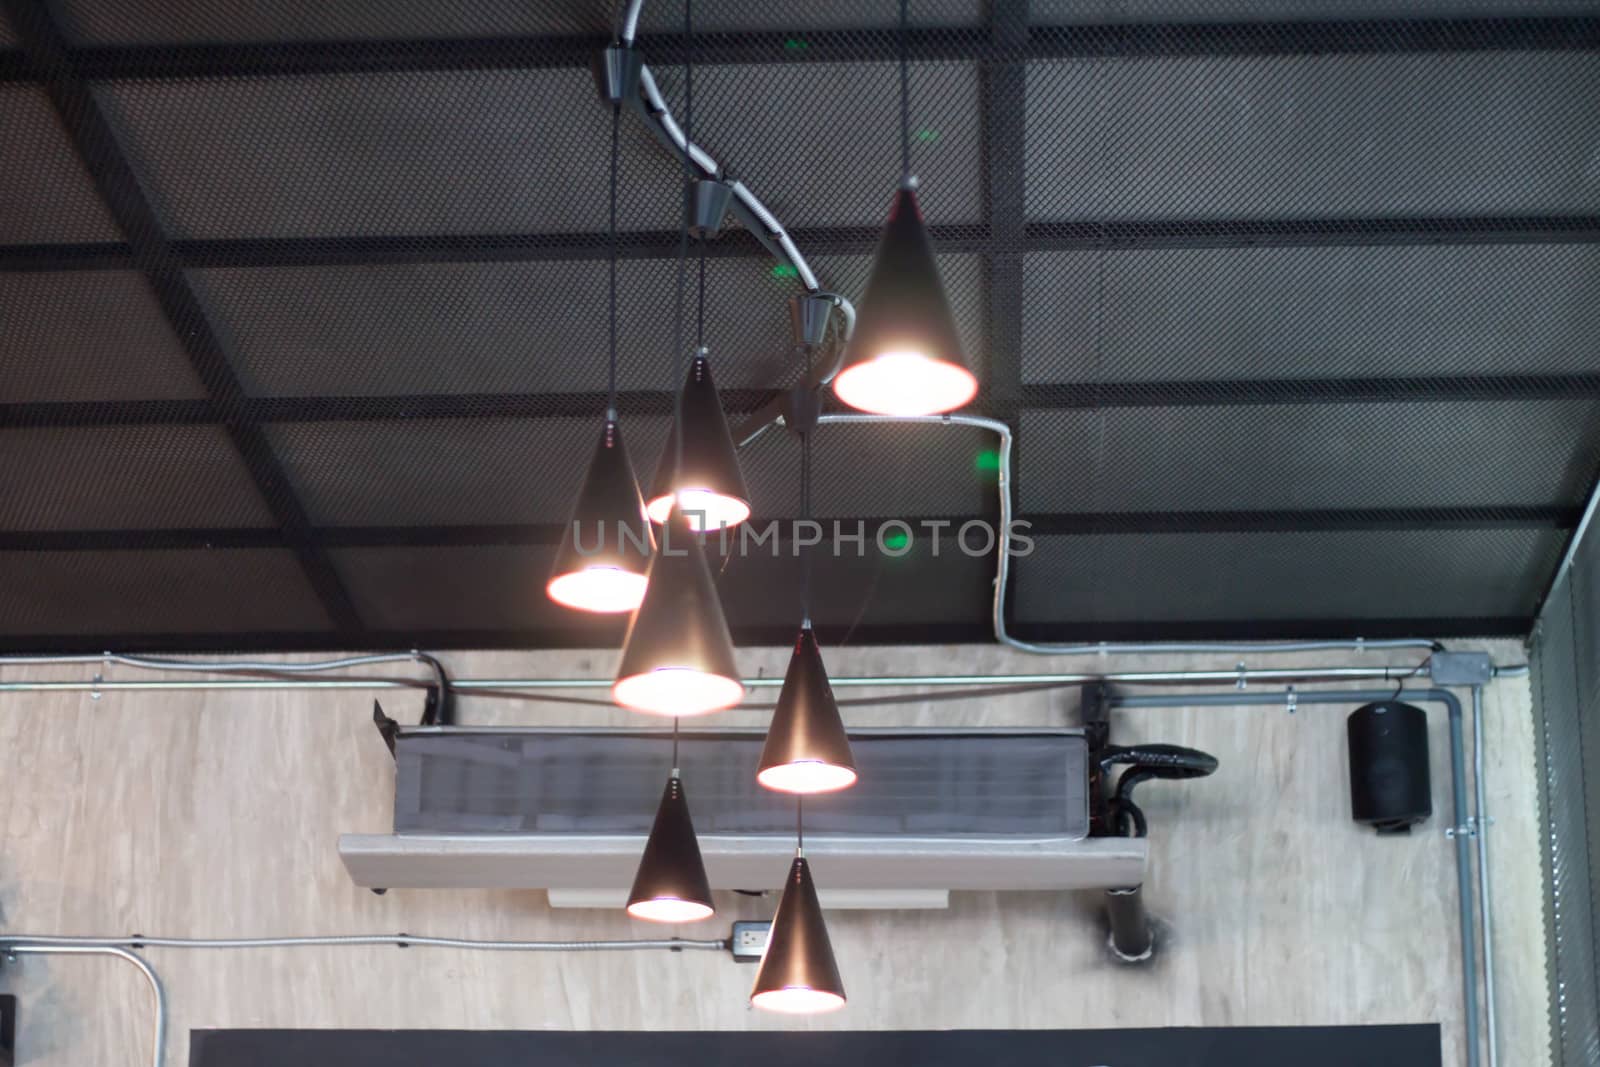 Lamps triangular roof by primzrider